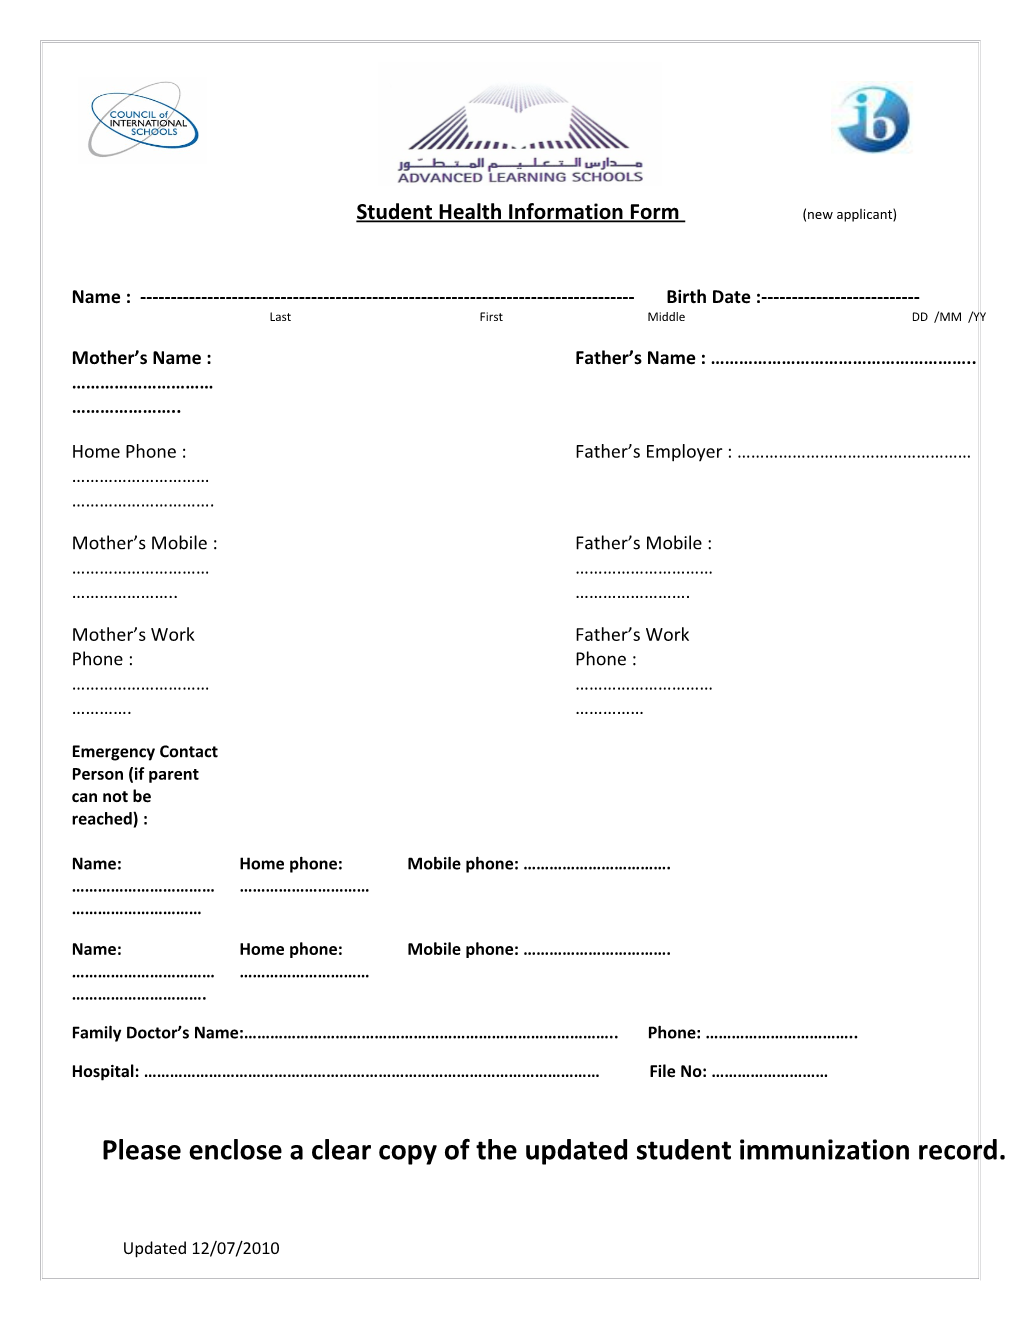 Student Health Information Form (Newapplicant)